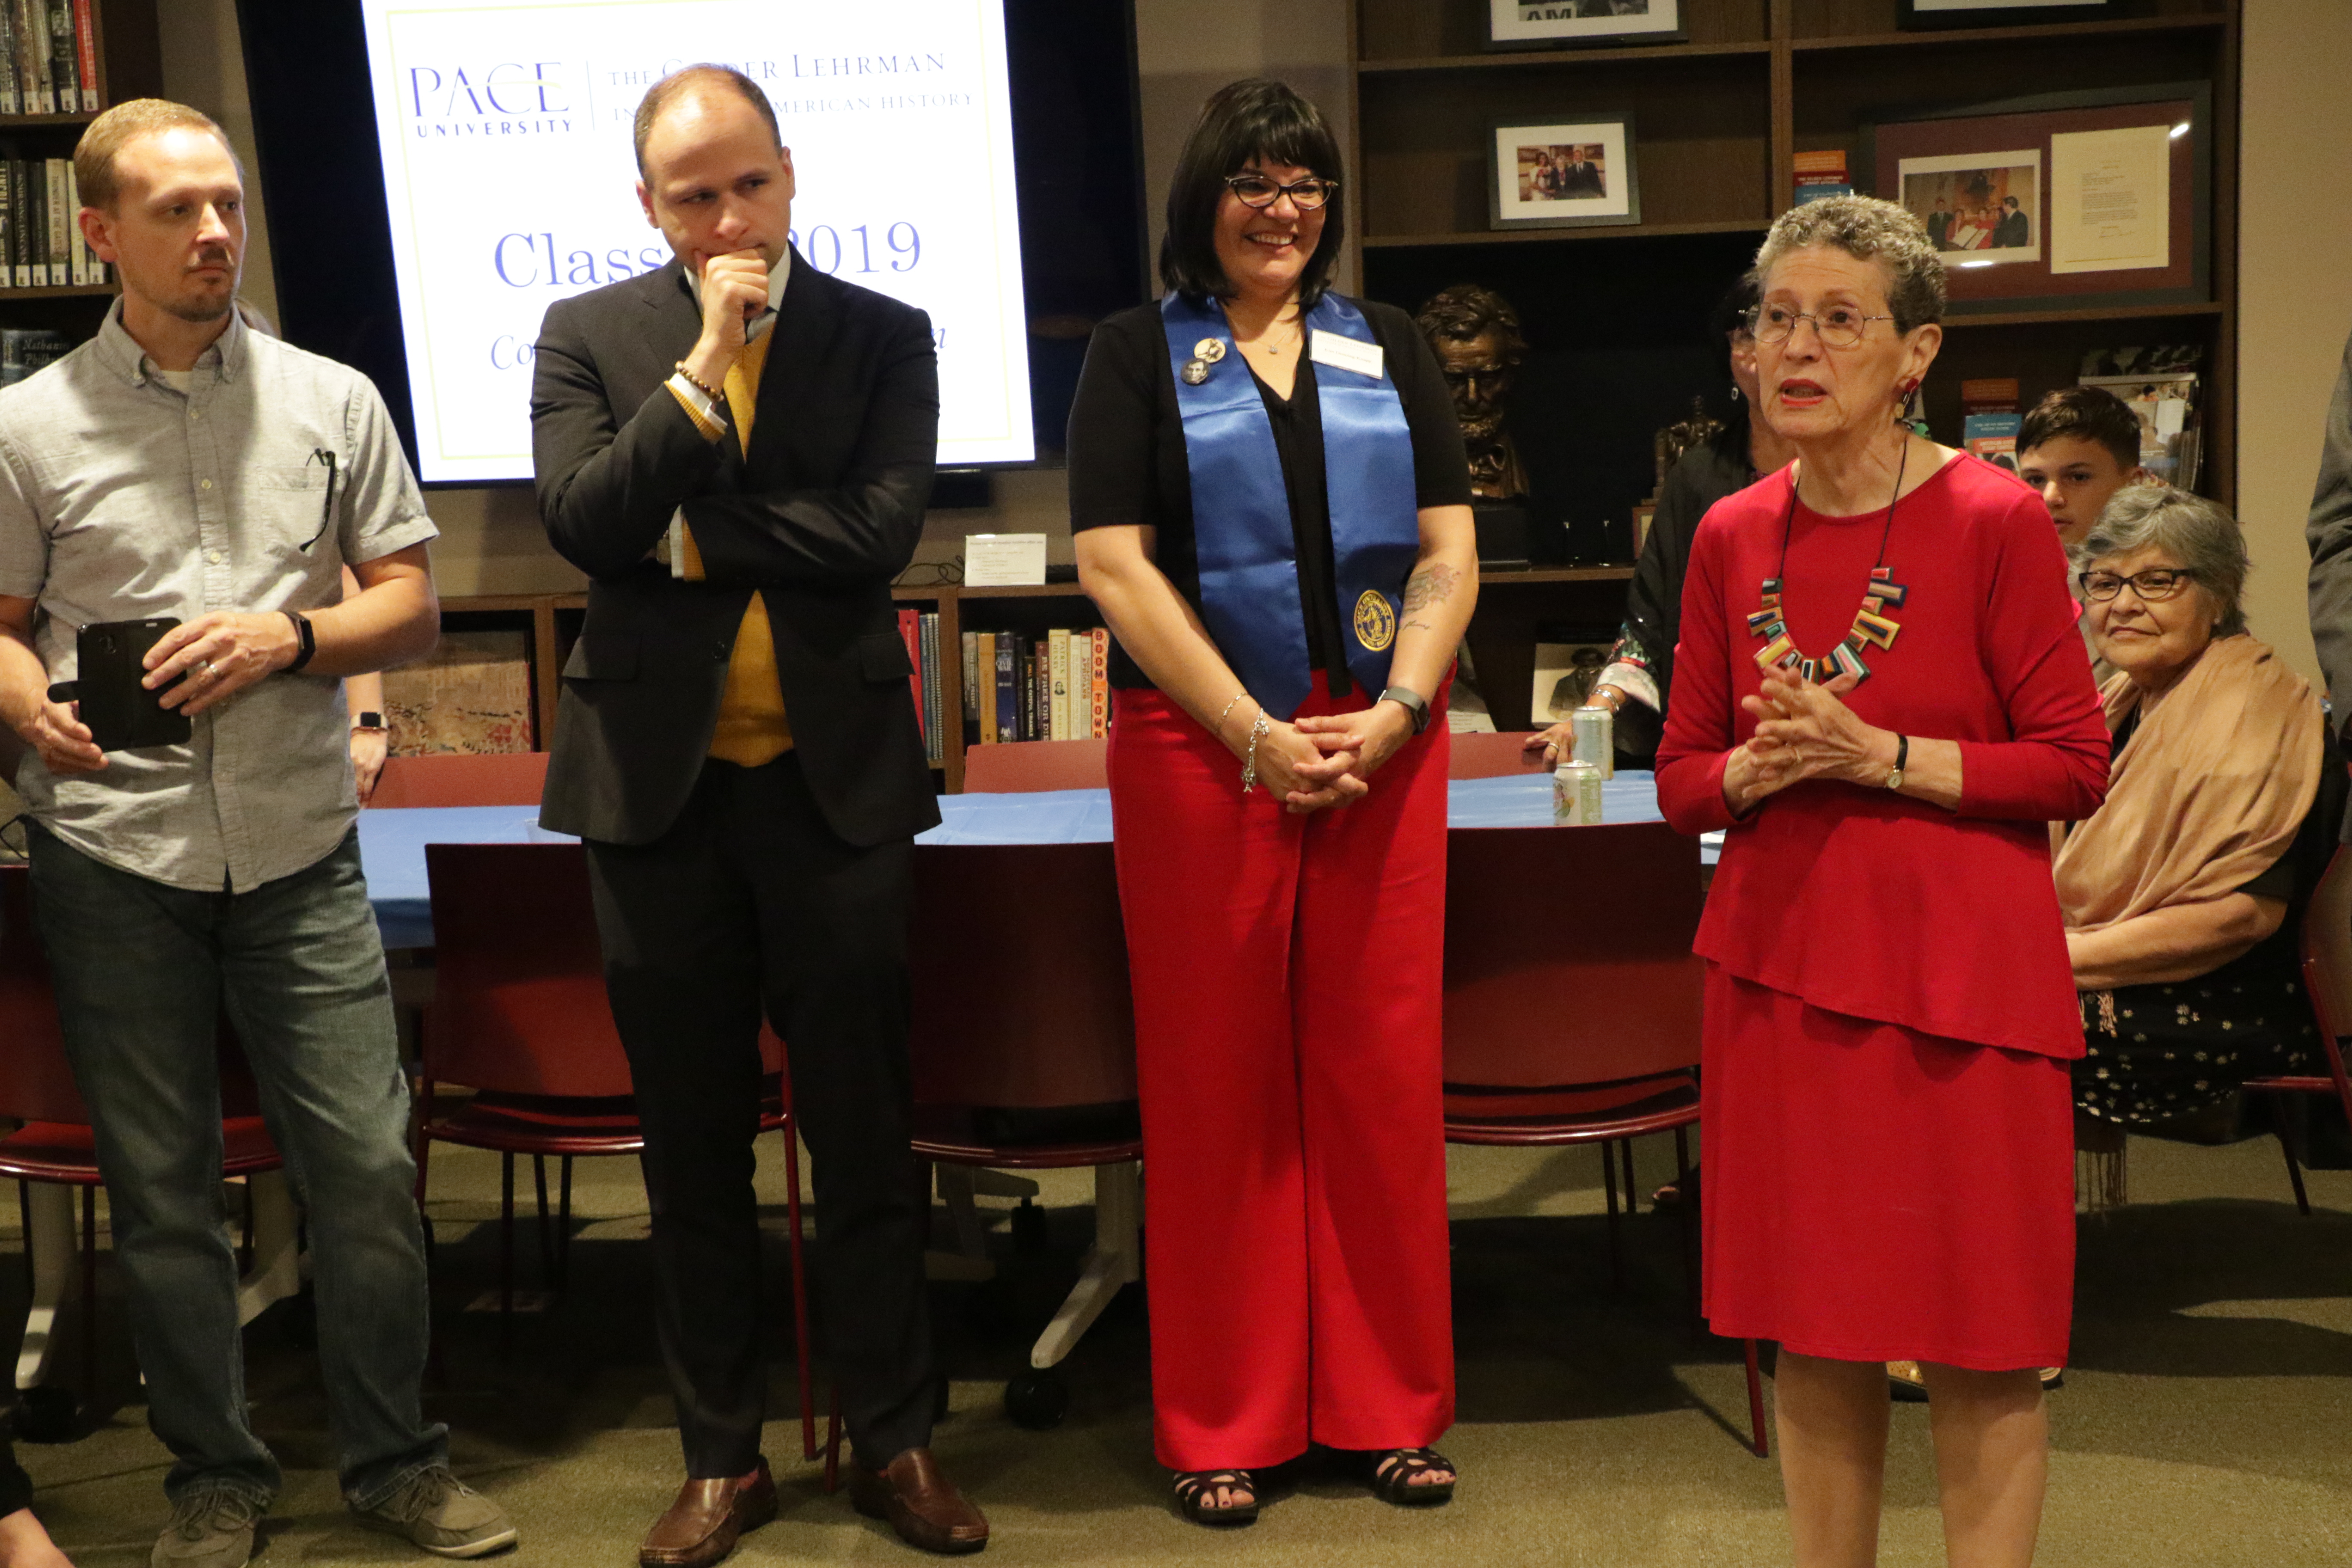 Maksim Astashinskiy (second from left) led a section as a Pace professor and CUNY Professor Carol Berkin (far right) led "Women in the American Revolution" in the Fall 2018 semester.